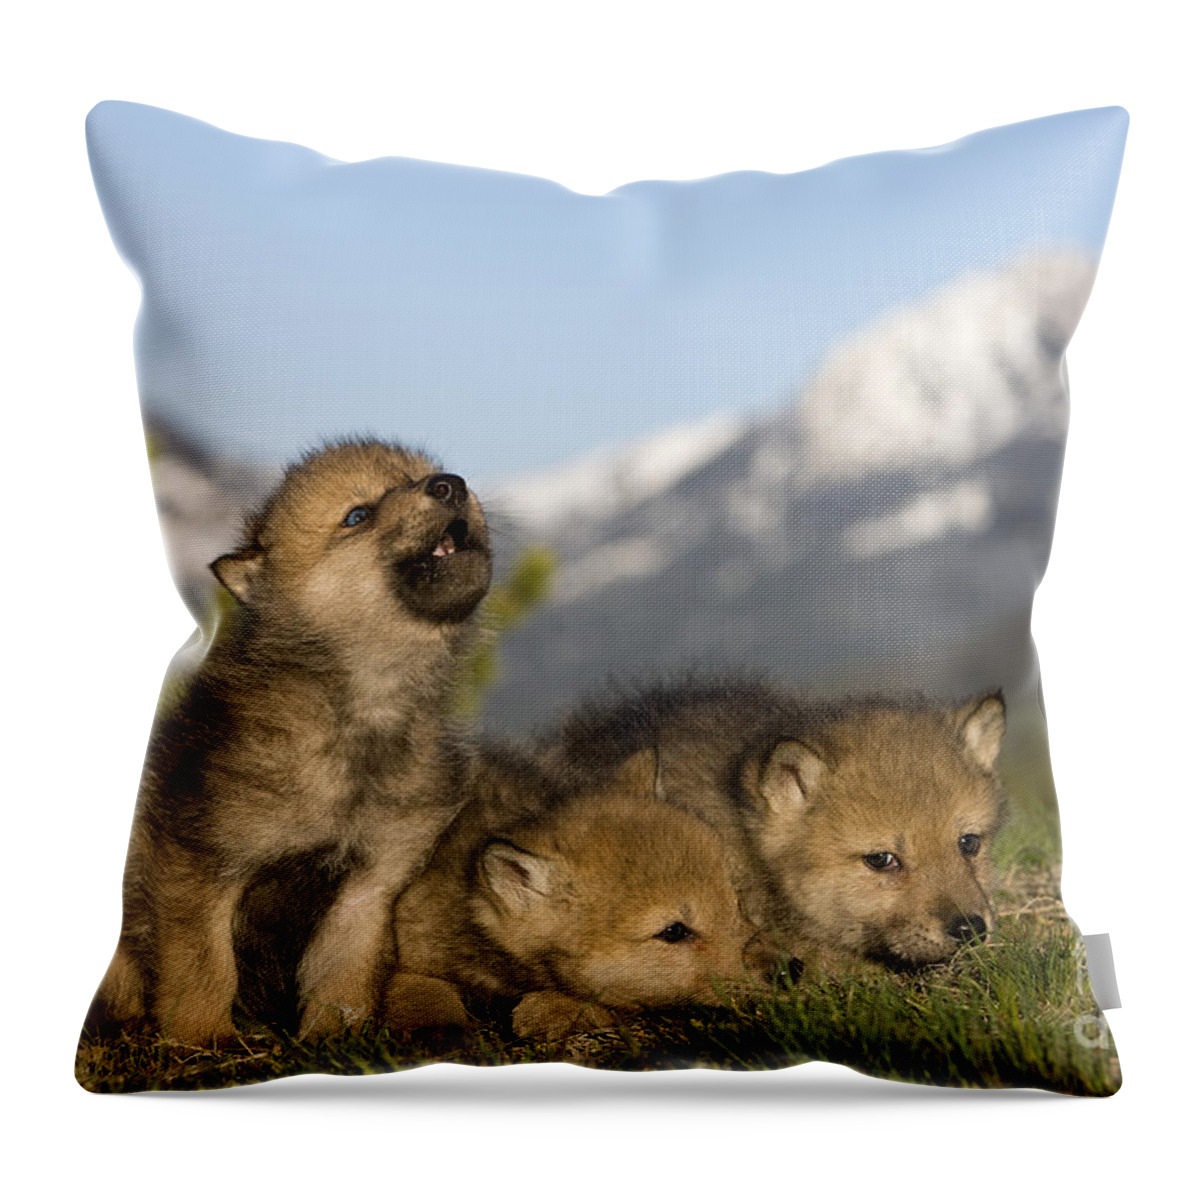 Gray Wolf Throw Pillow featuring the photograph Howling Wolf Cub #2 by Jean-Louis Klein & Marie-Luce Hubert